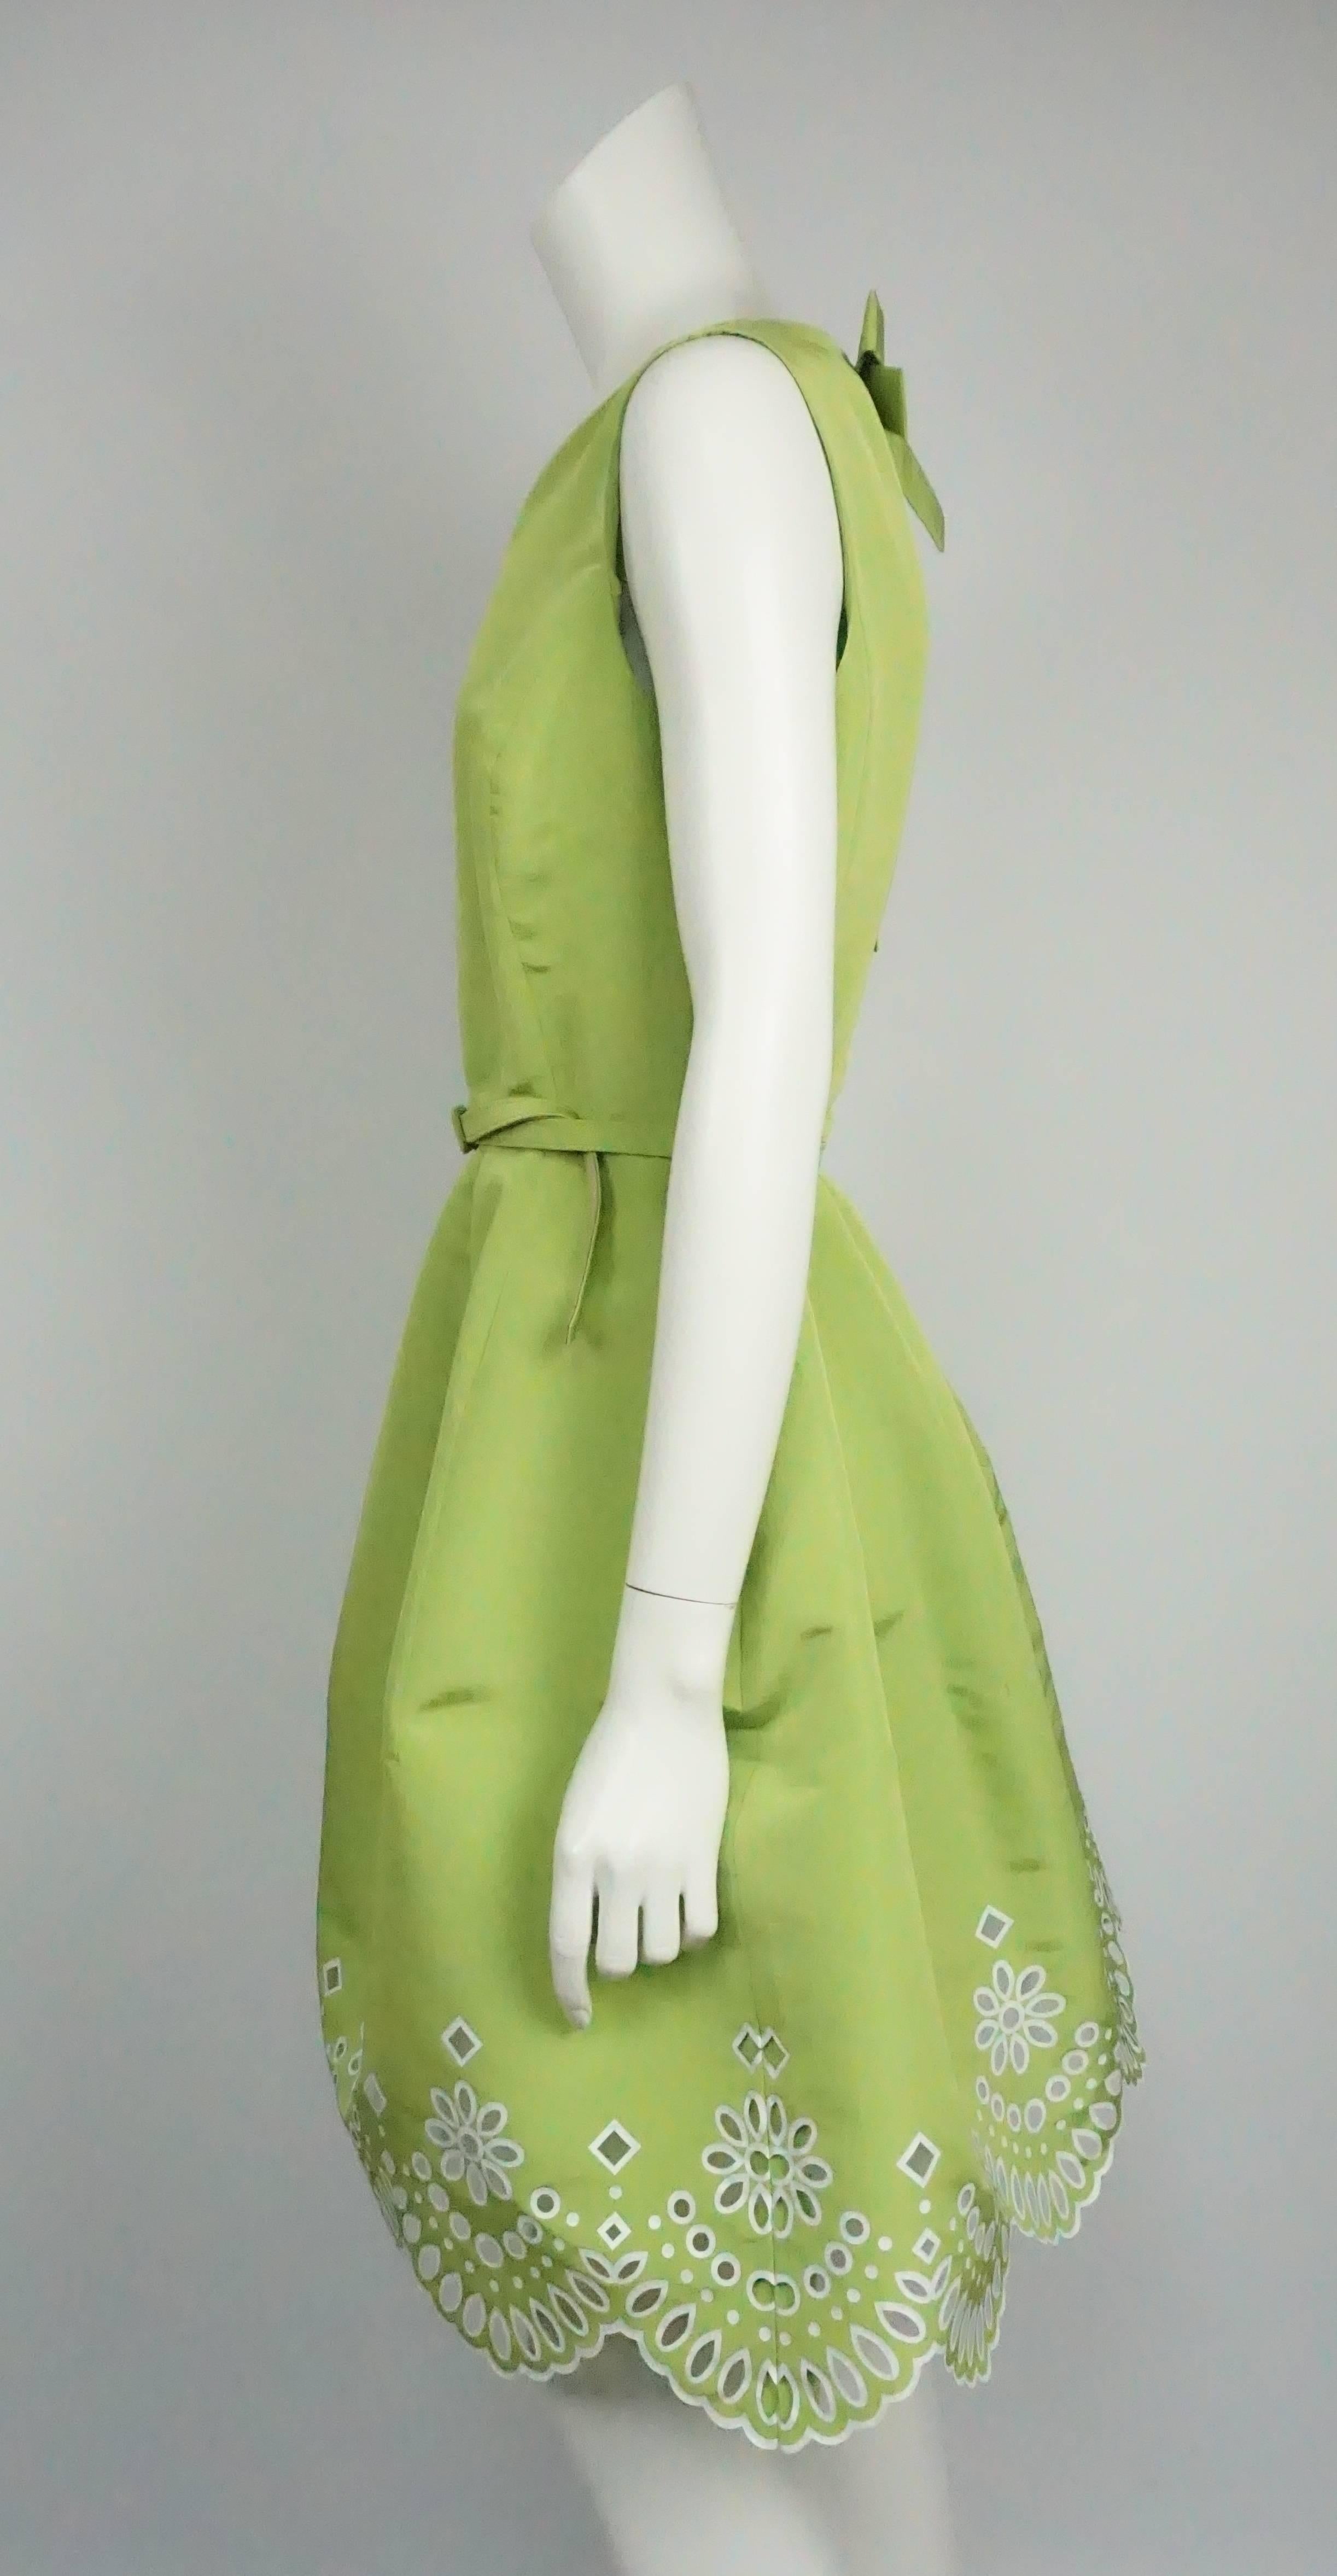 Oscar De La Renta Lime Green and White Eyelet Silk Chartreuse Dress - 10  This girly eyelet dress is made up of silk. It has no sleeves and cinches in at the waist with a removable belt. The skirt goes out into a bubble skirt and has two side